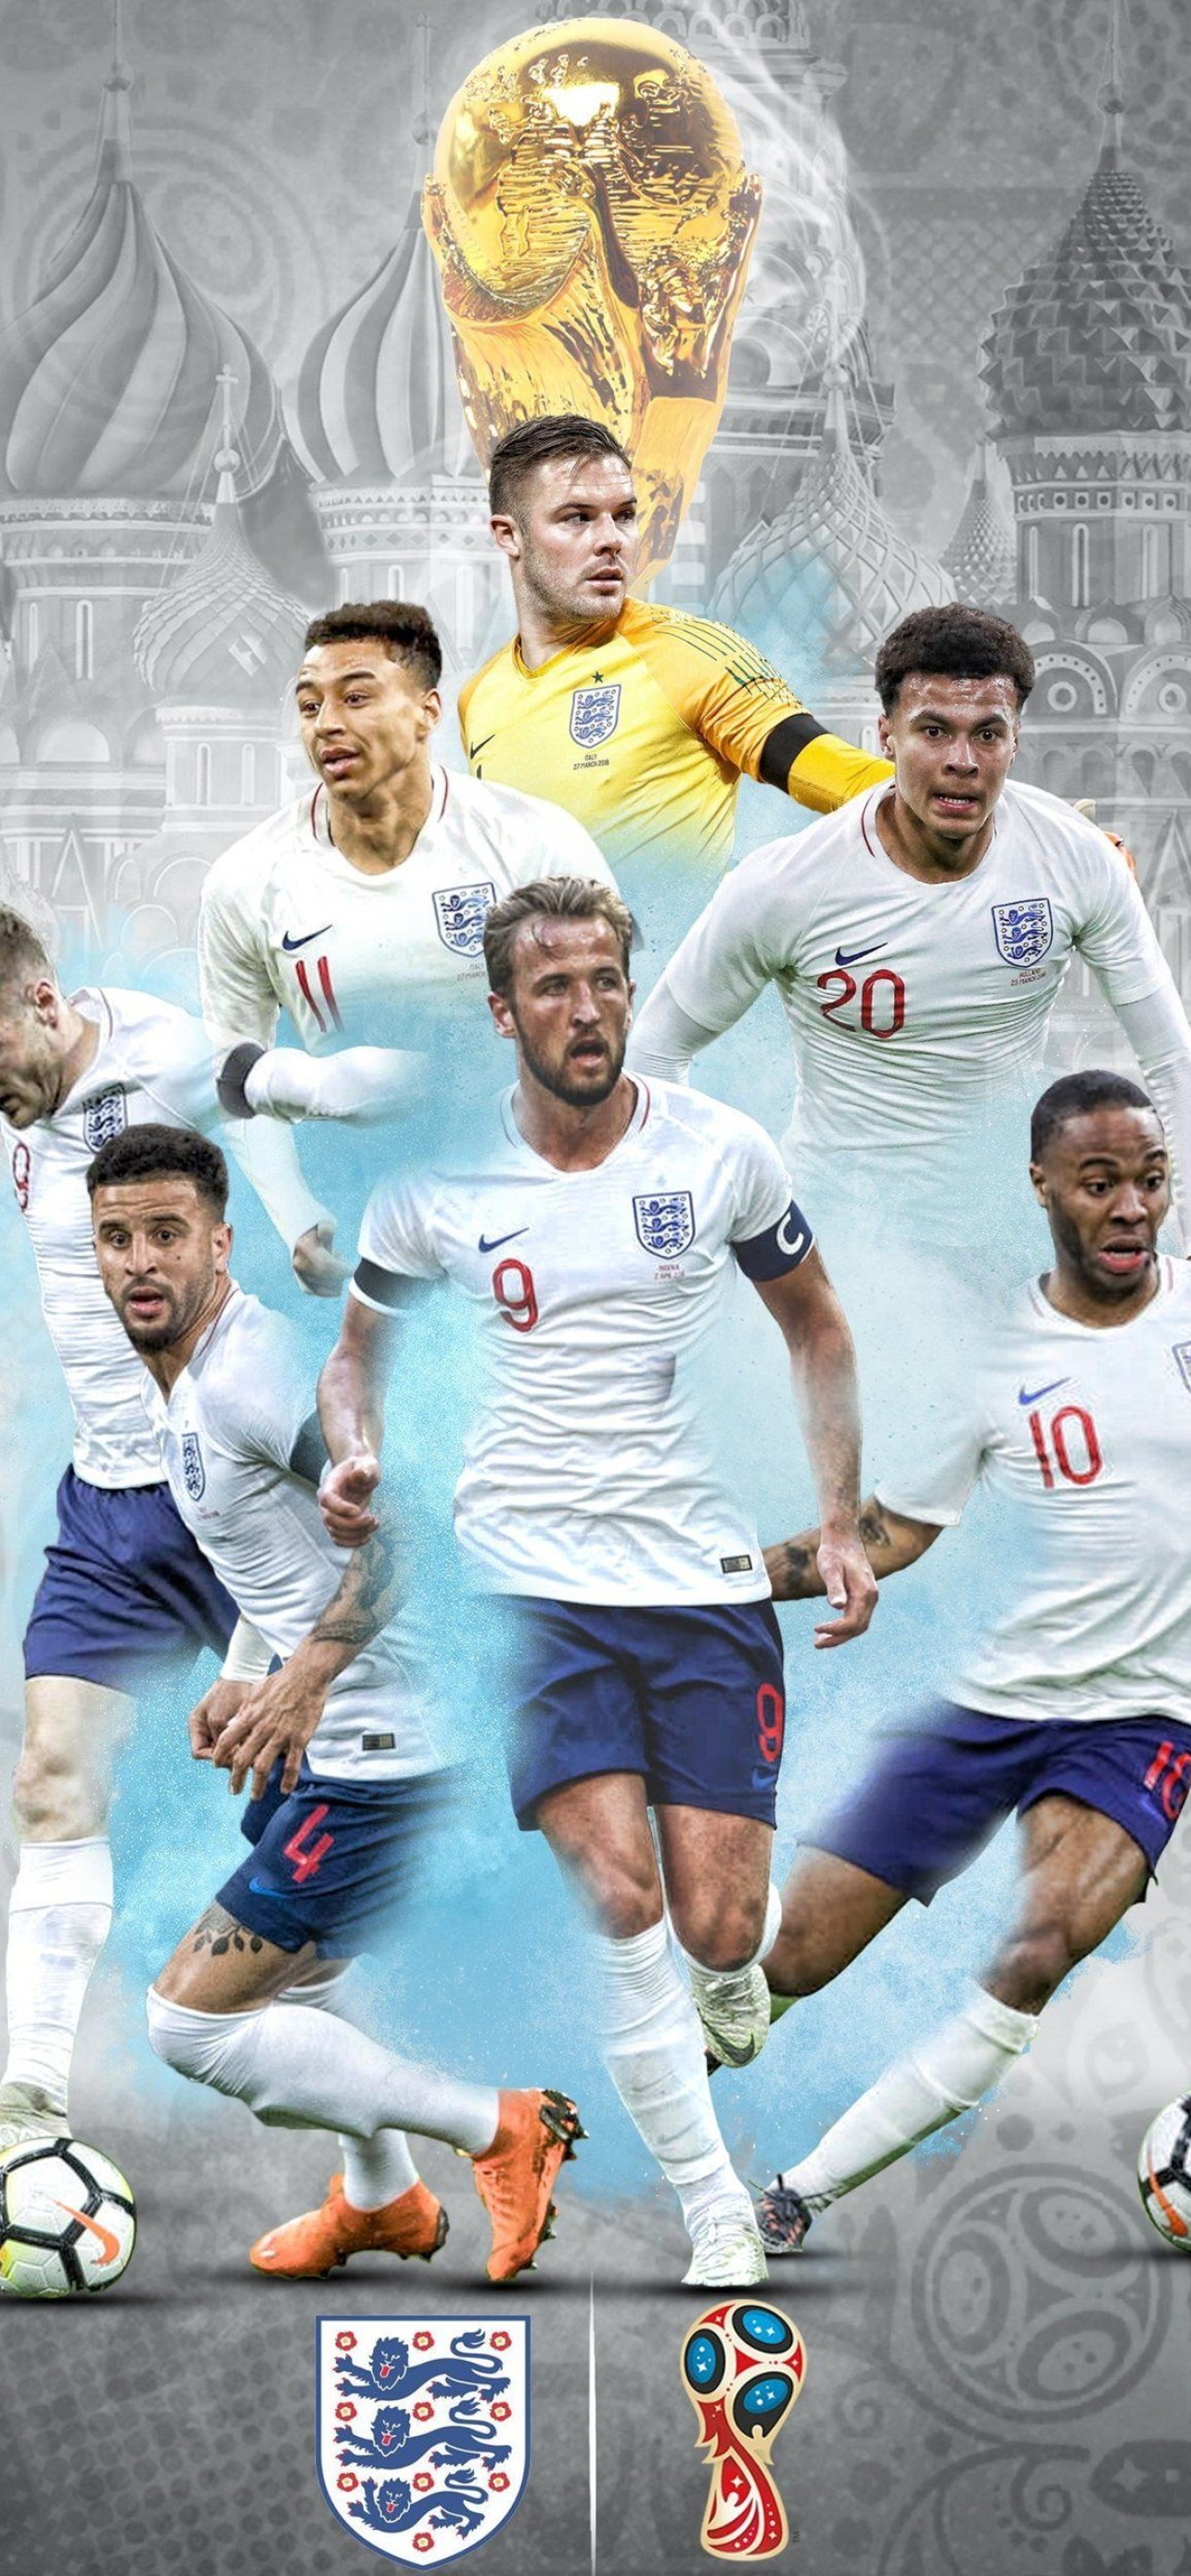 England national team, Football passion, Inspiring wallpapers, Moments of victory, 1290x2780 HD Handy